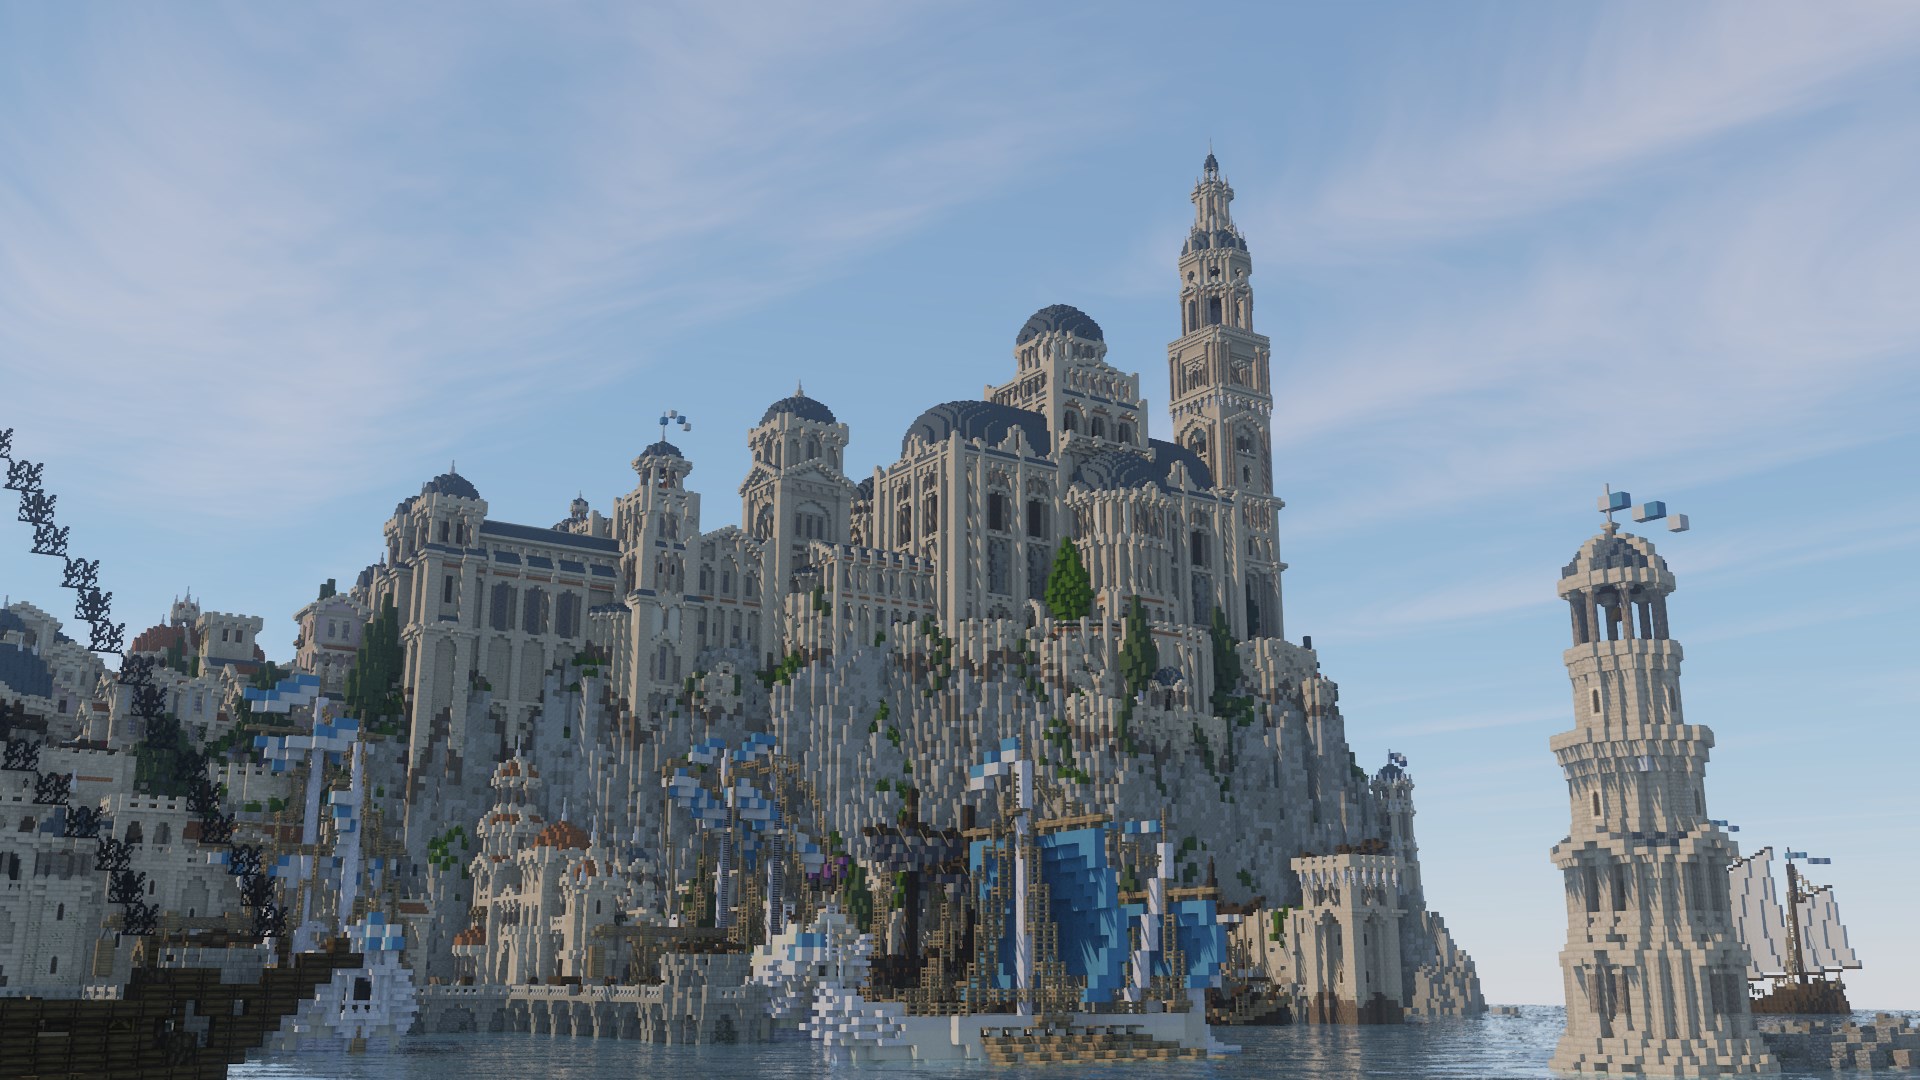 Meet the team who dedicated 10 years to building Middle-earth in Minecraft